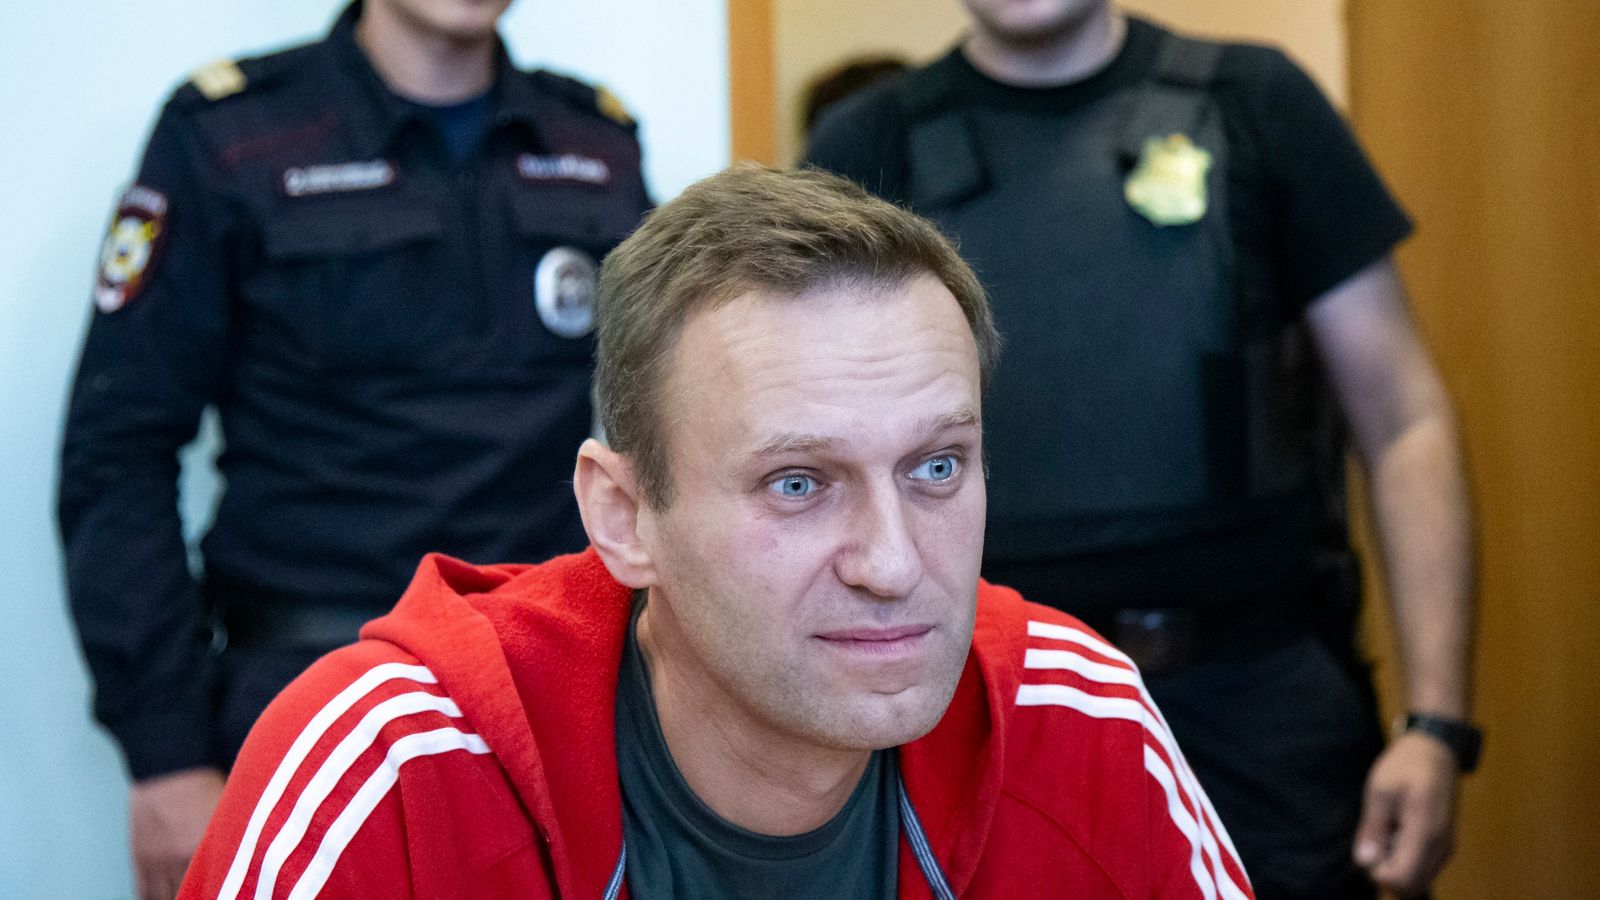 navalny was set to be part of prison swap before he died, ally says